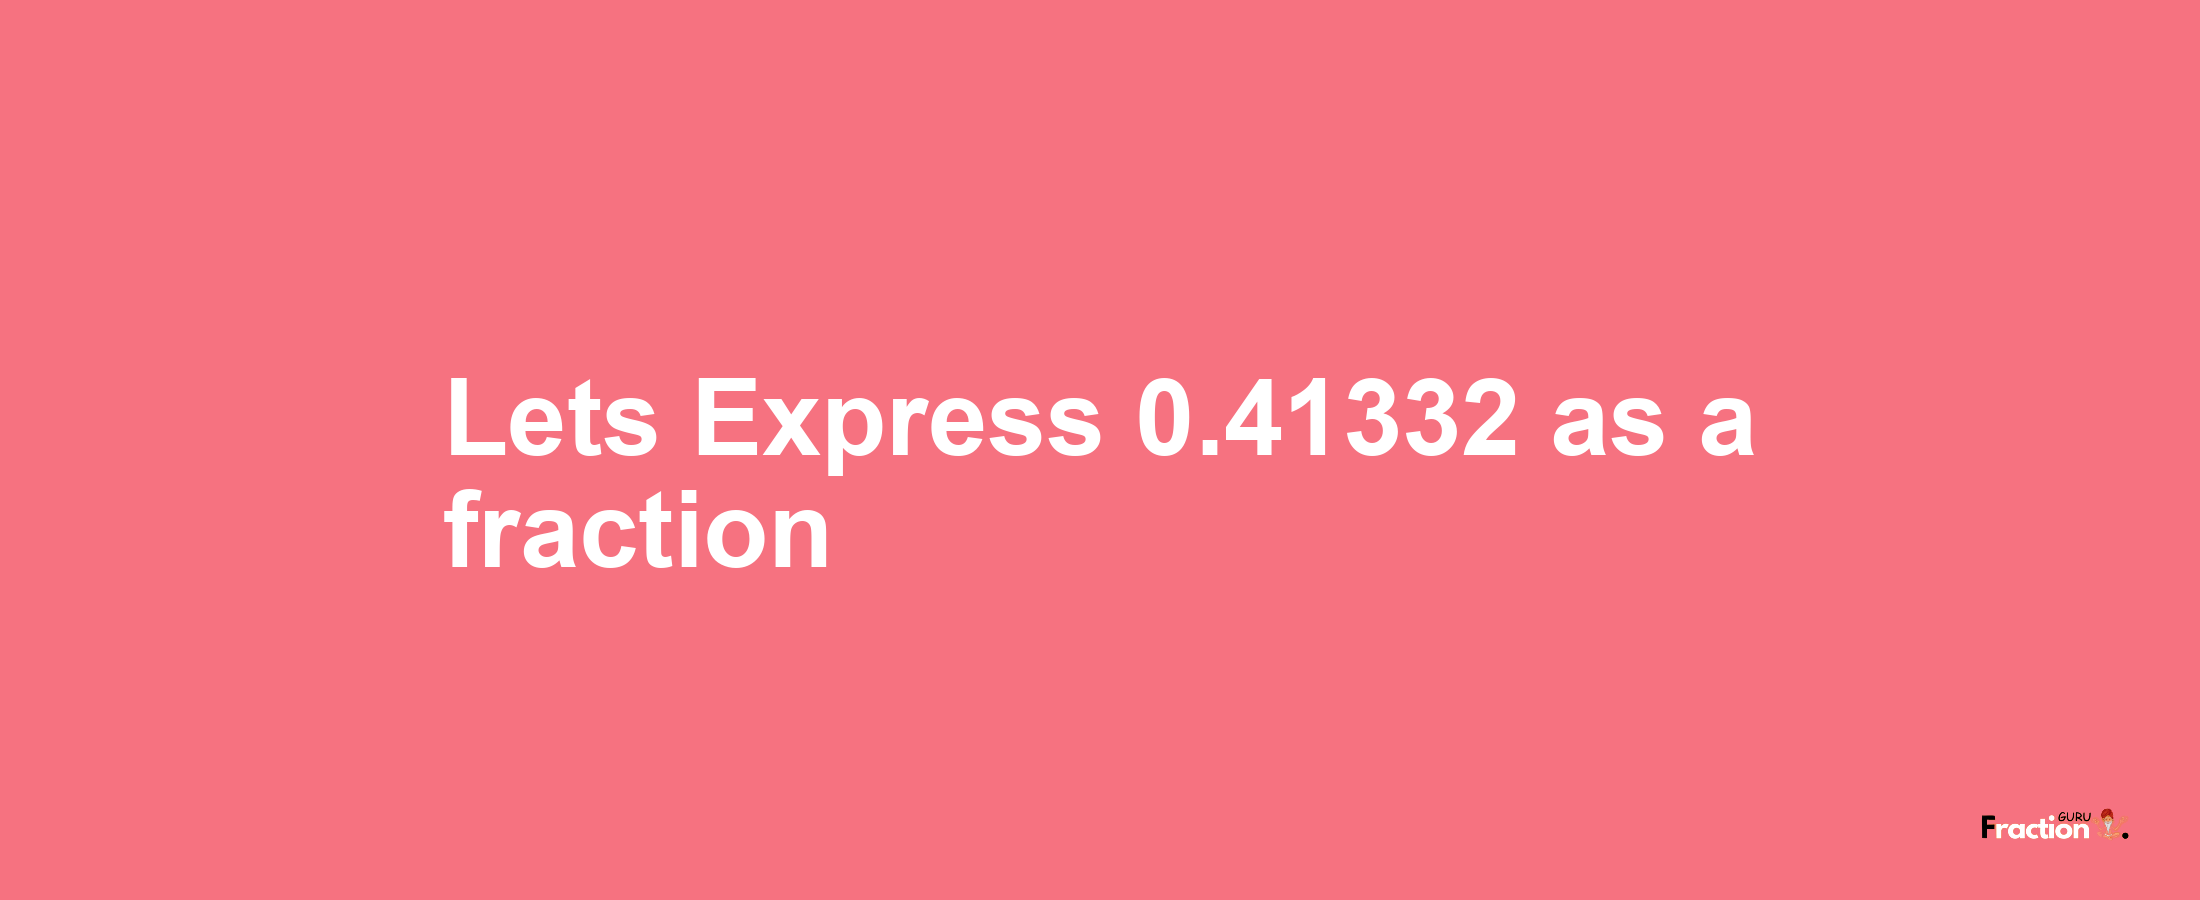 Lets Express 0.41332 as afraction